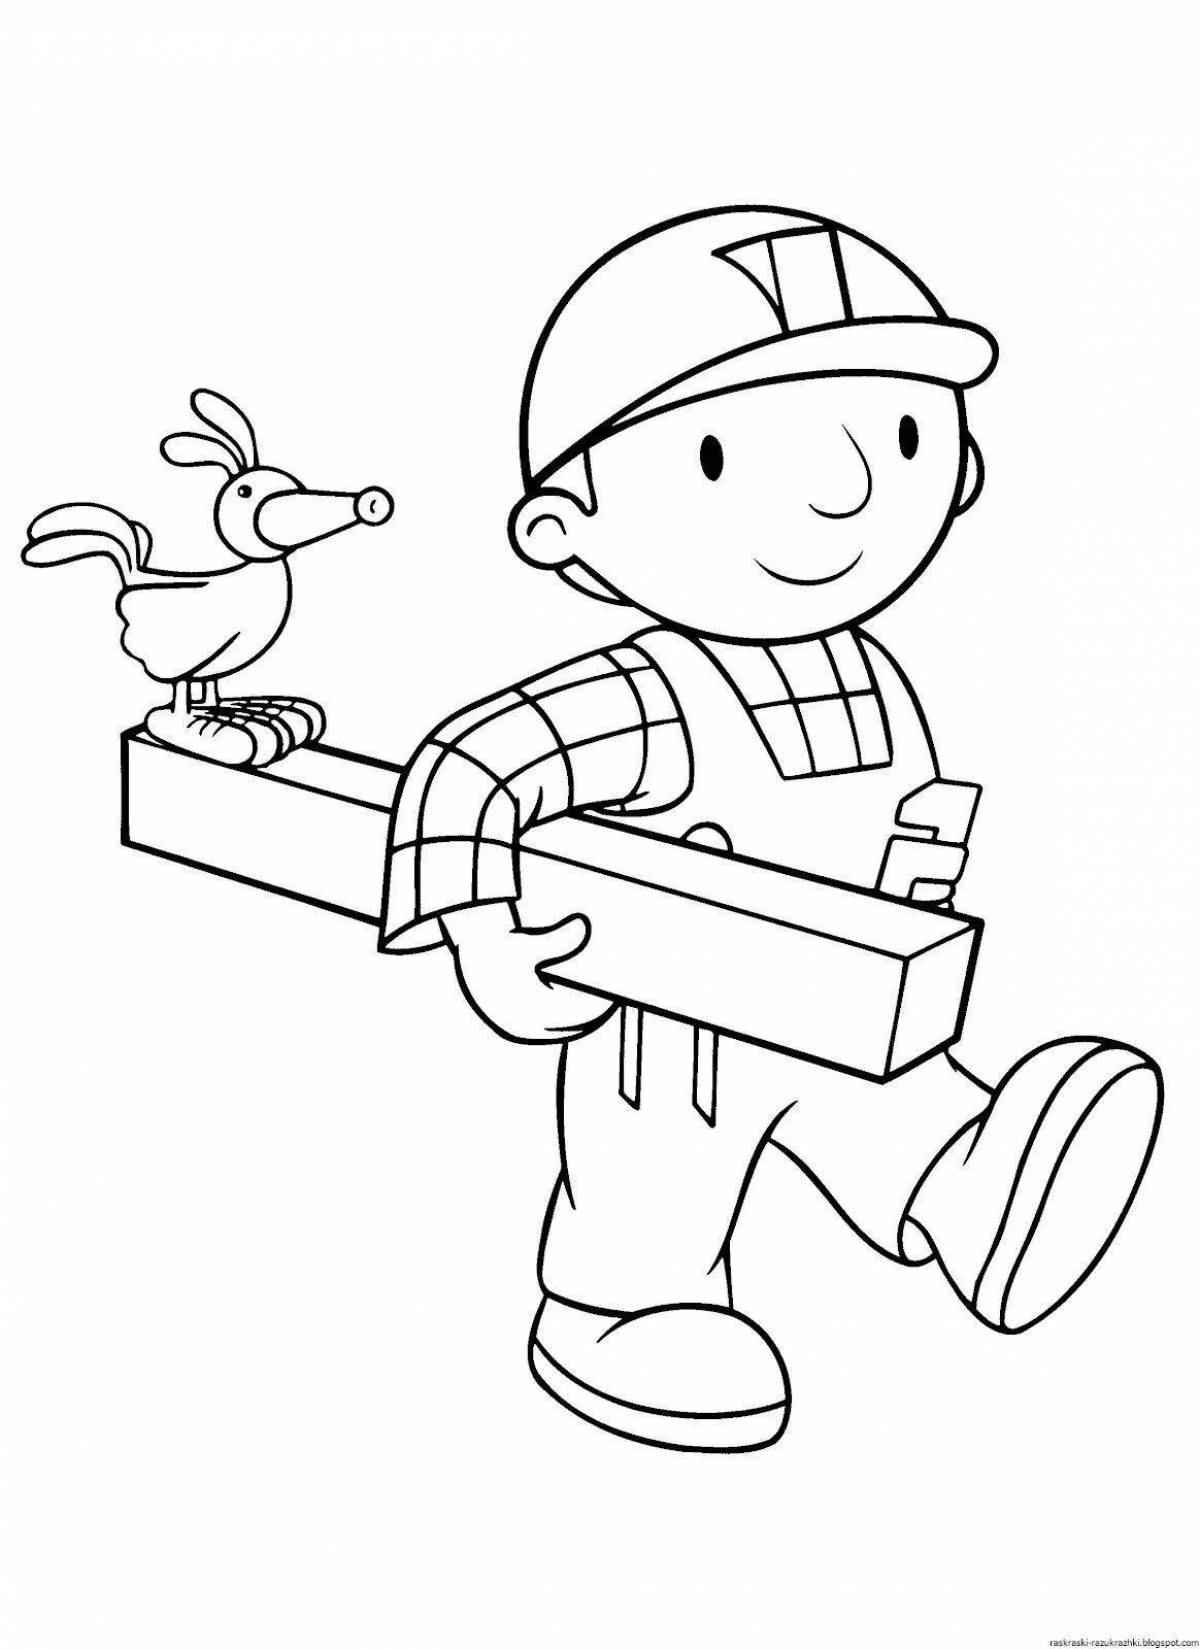 Colorful builder coloring page